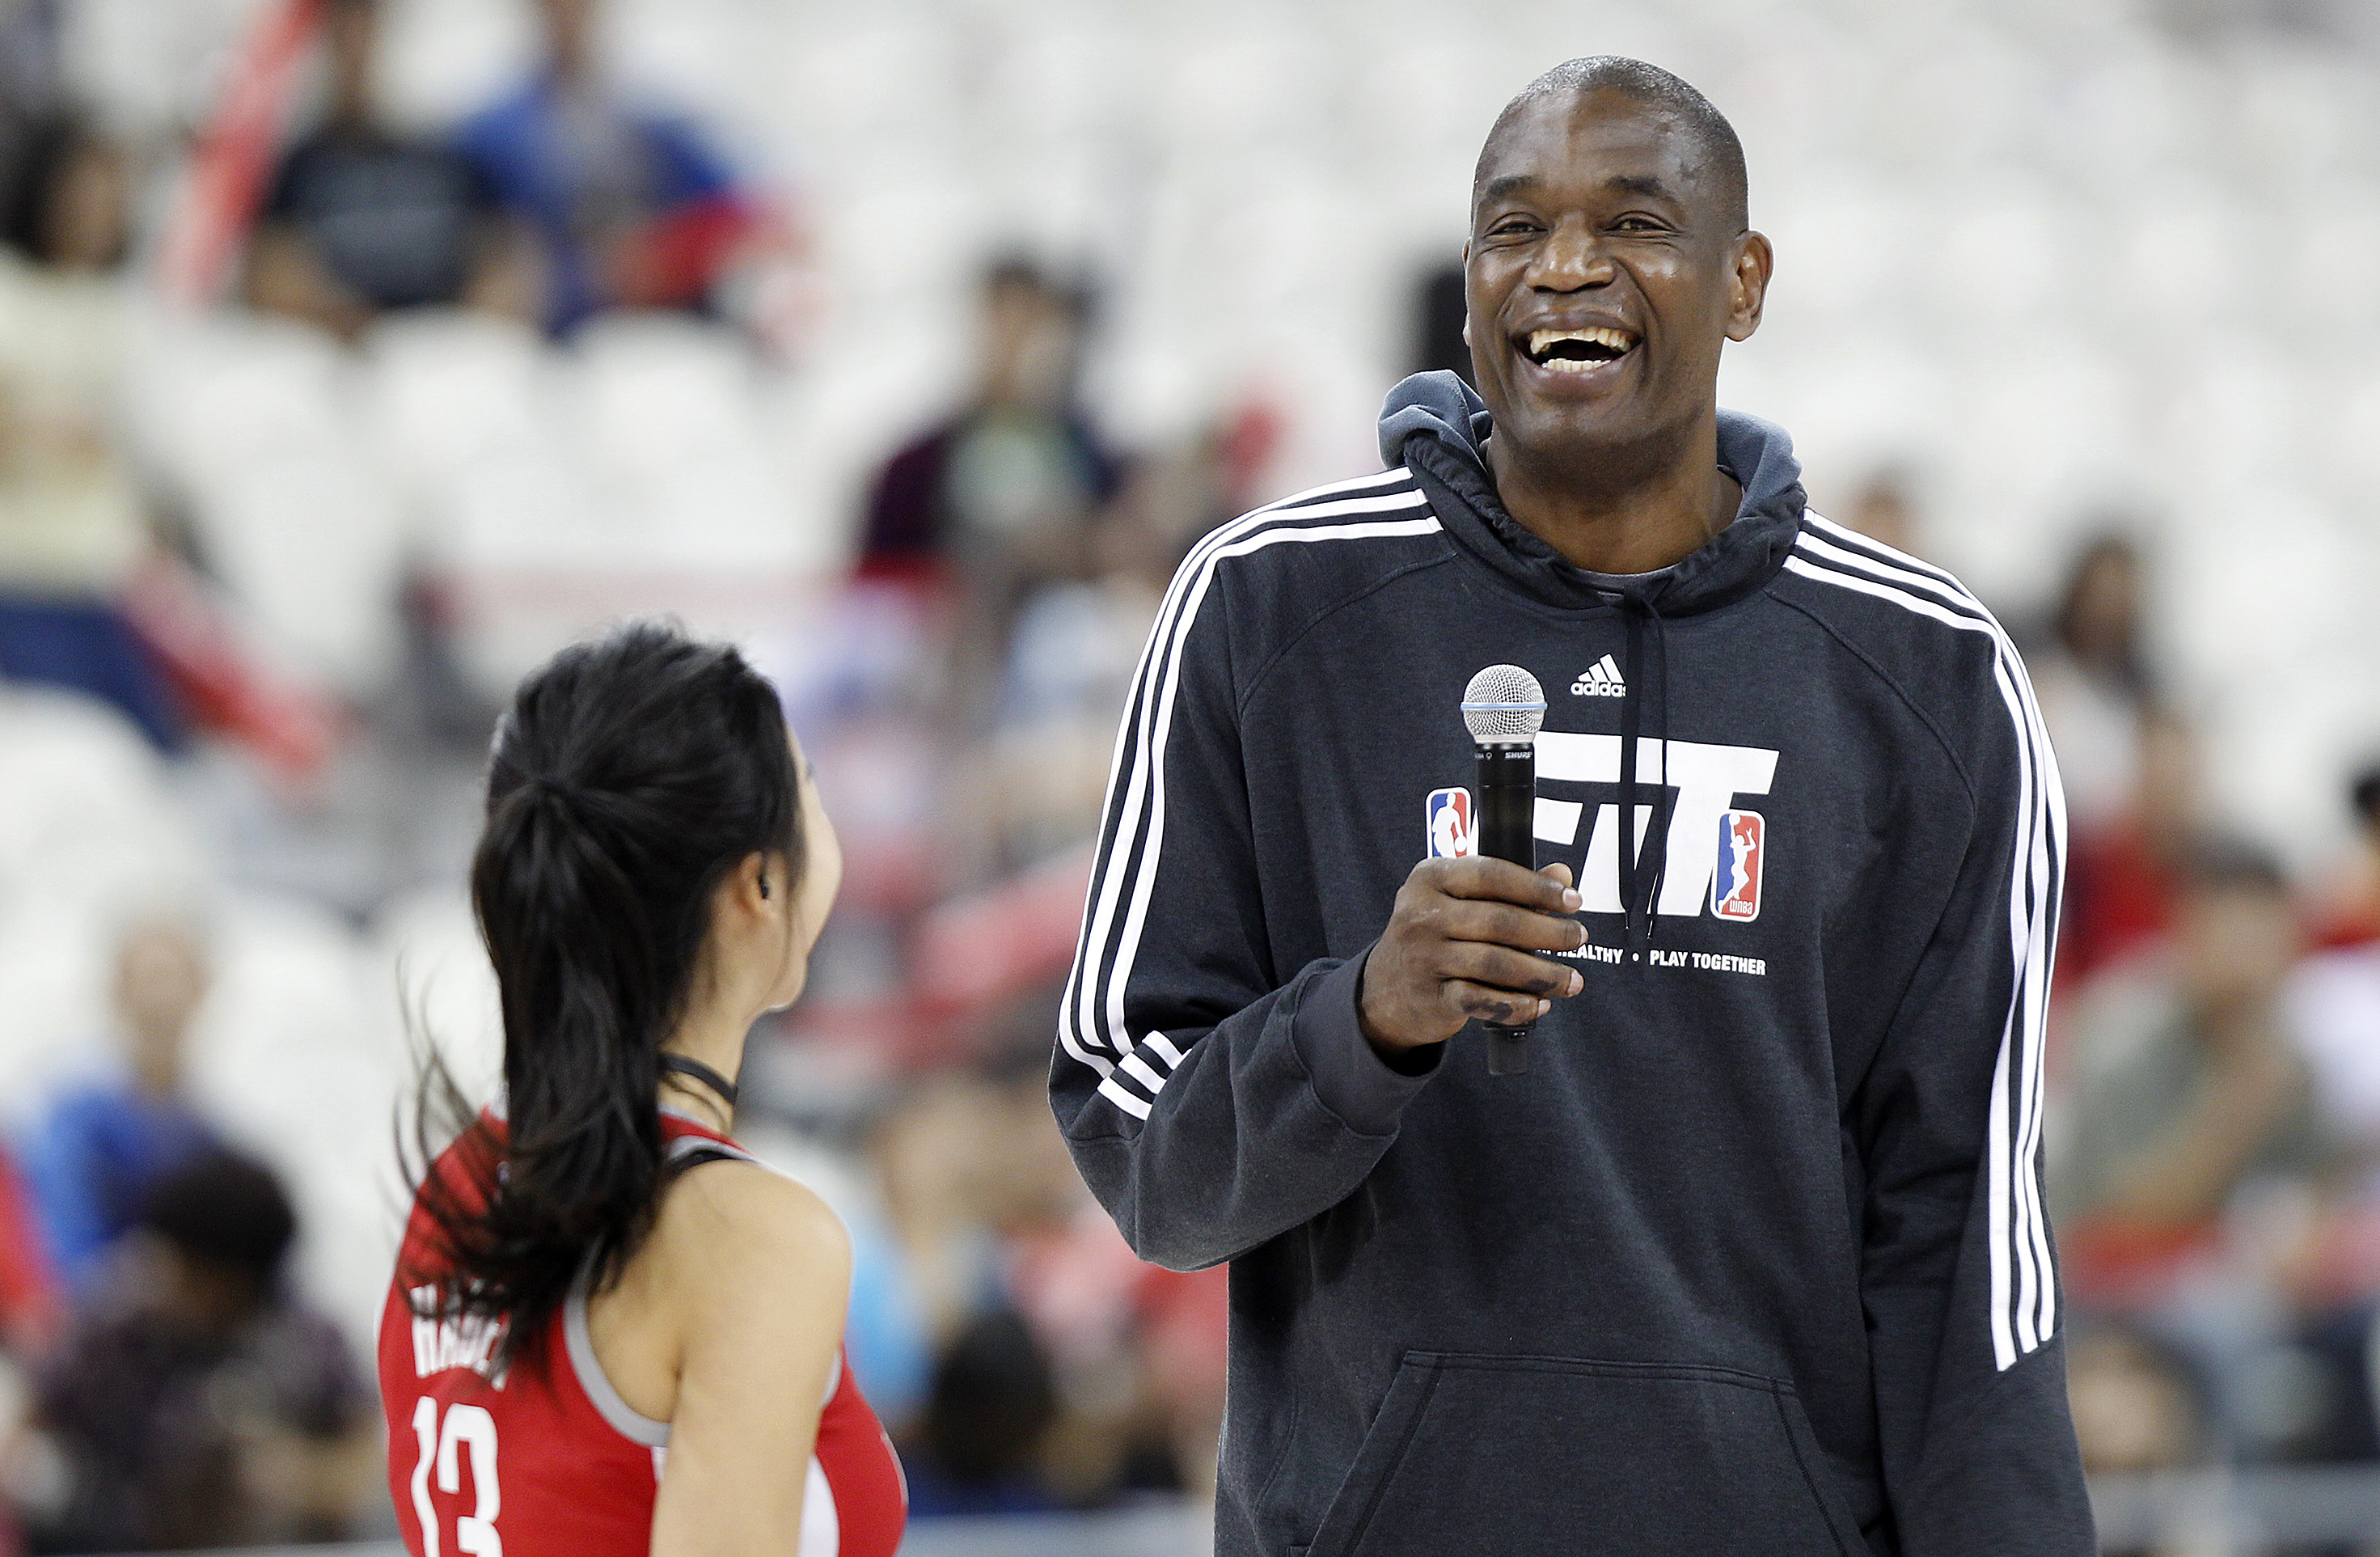 Dikembe Mutombo to have No. 55 jersey retired by Denver Nuggets